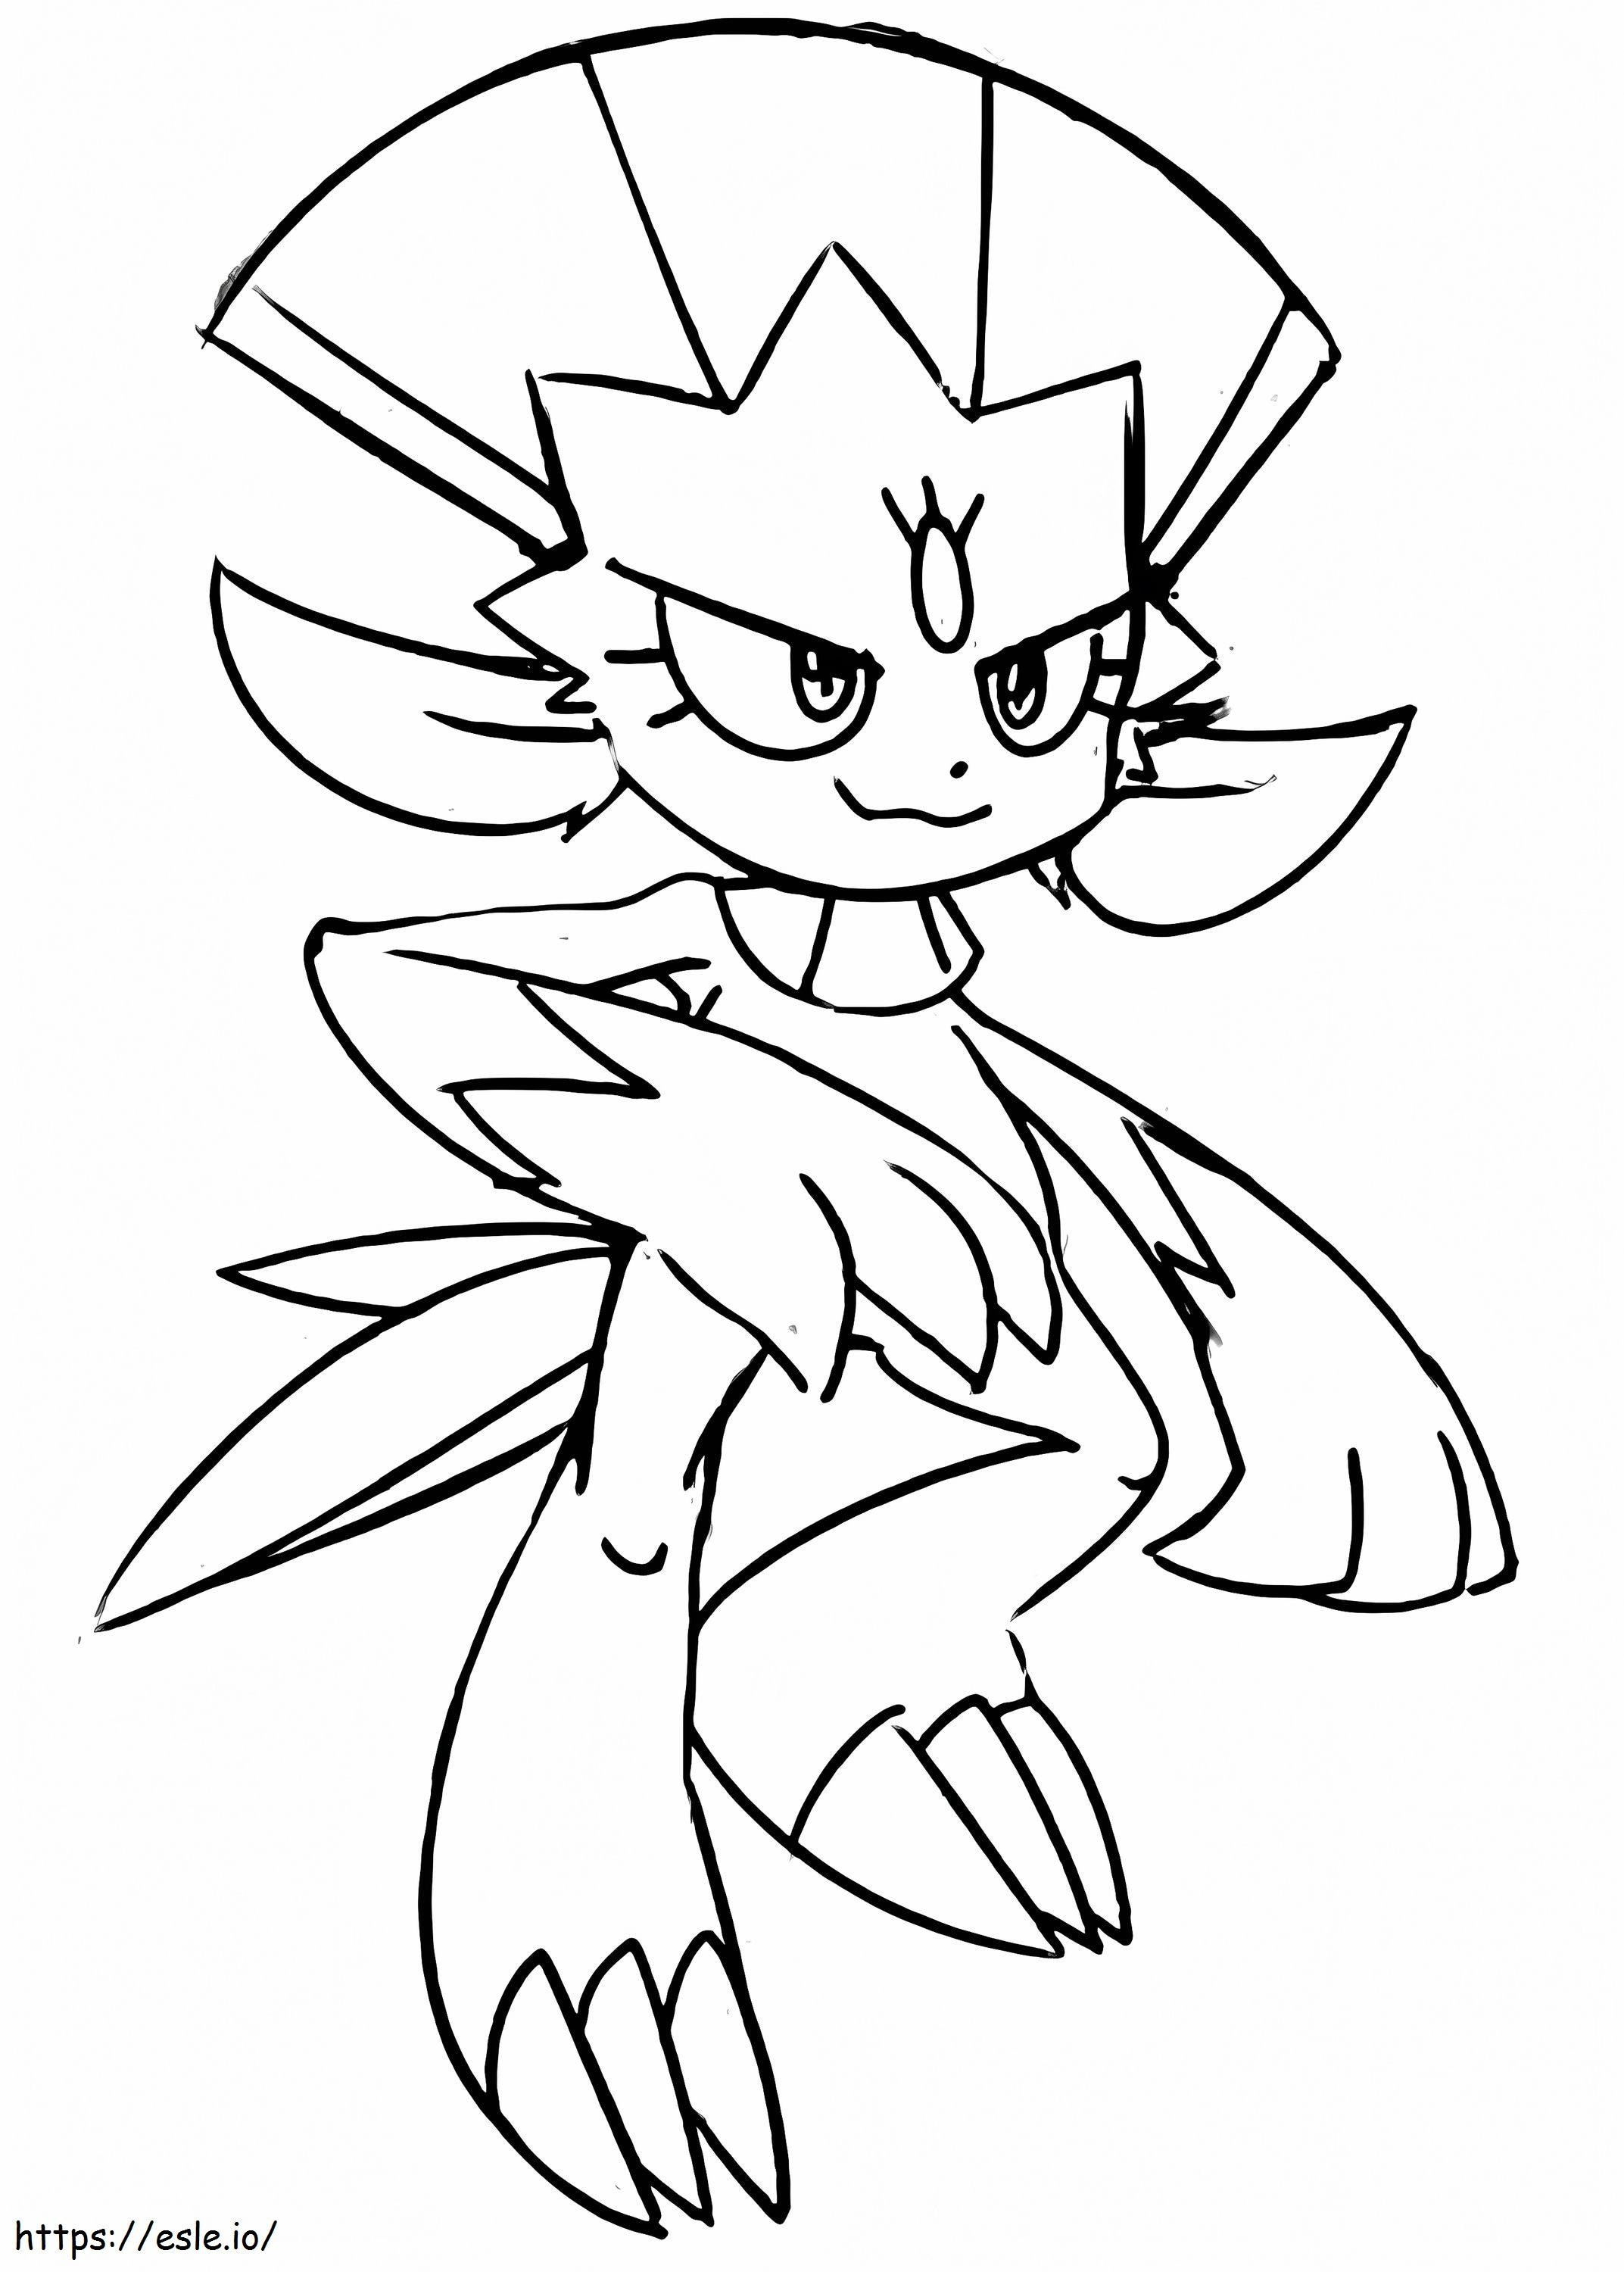 Weavile 1 coloring page